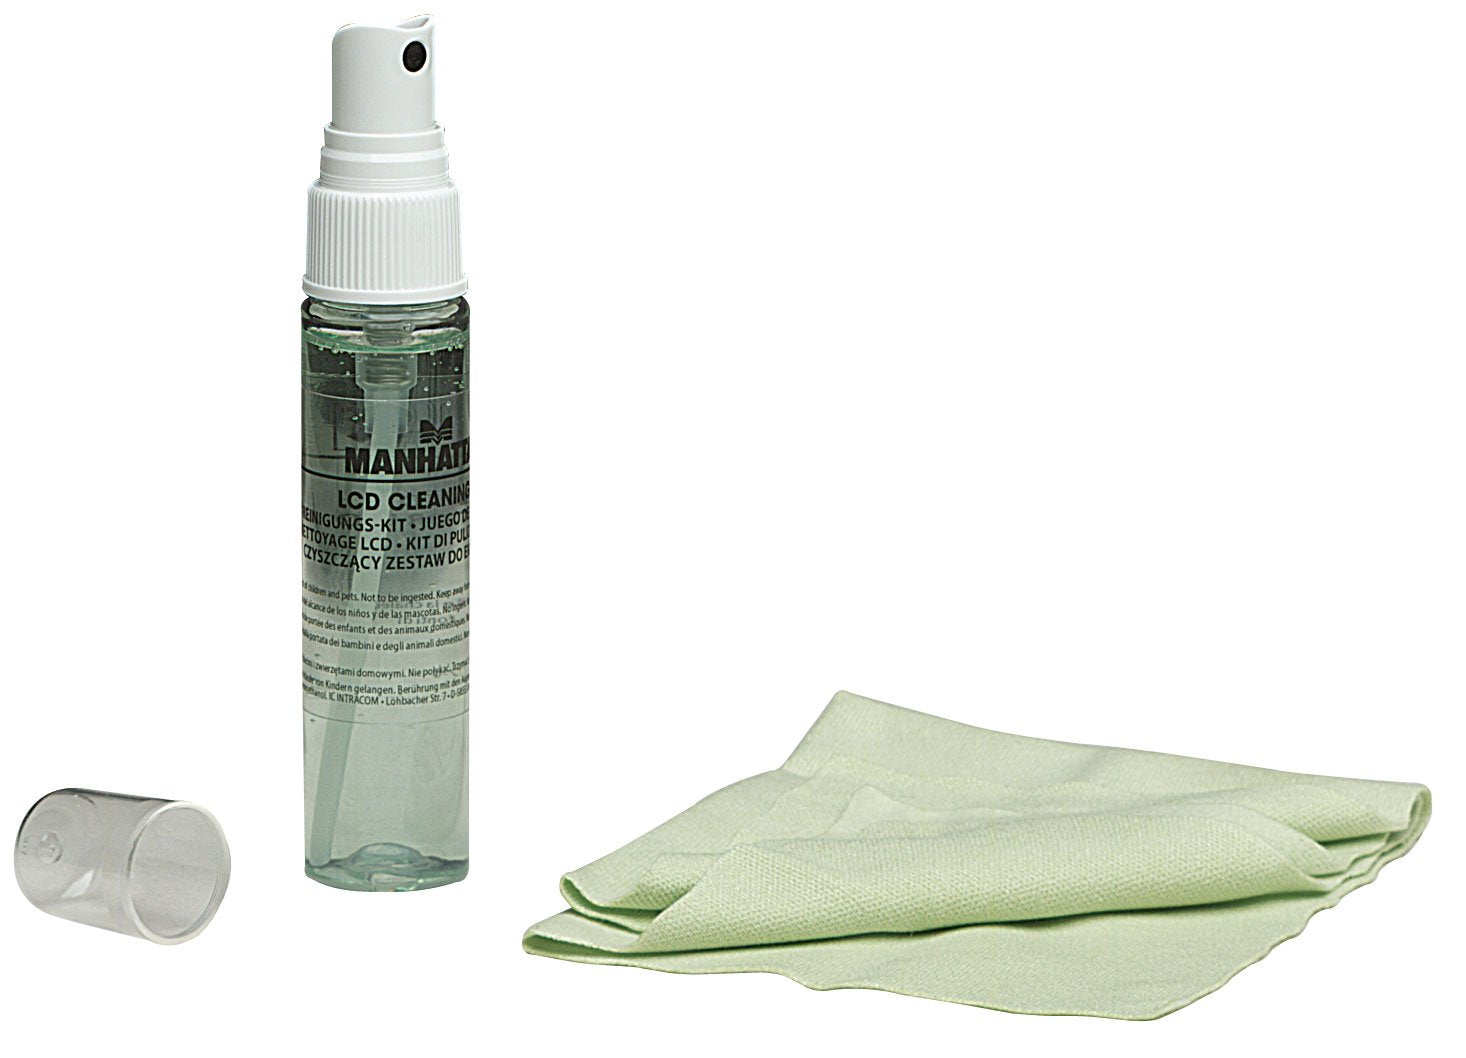 MANHATTAN 404204 LCD Cleaning Kit, Green Apple Scent